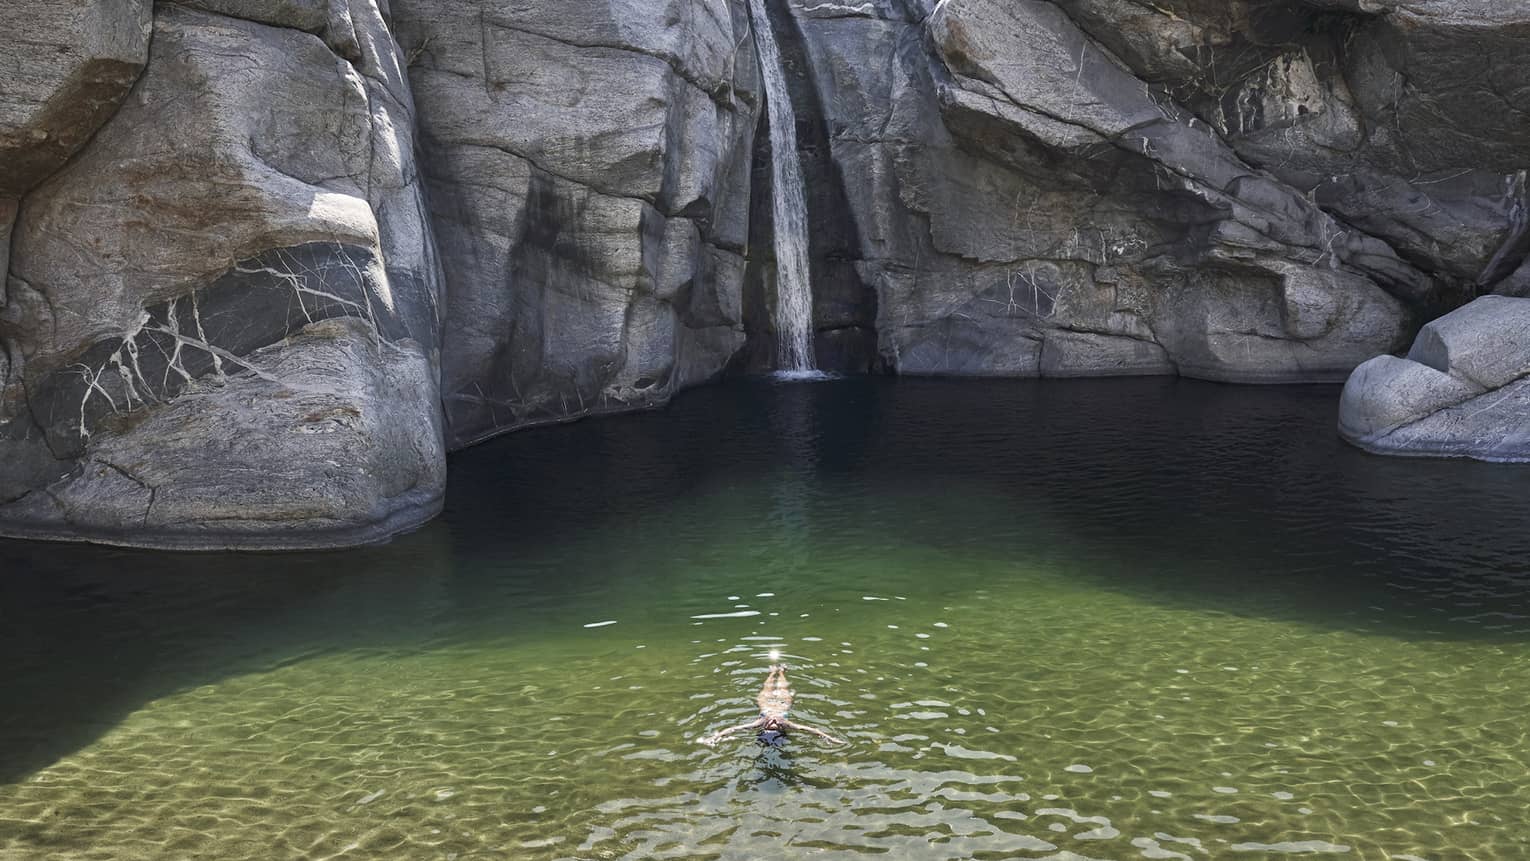 A person in a small well of water surrounded by large rock faces and trees.